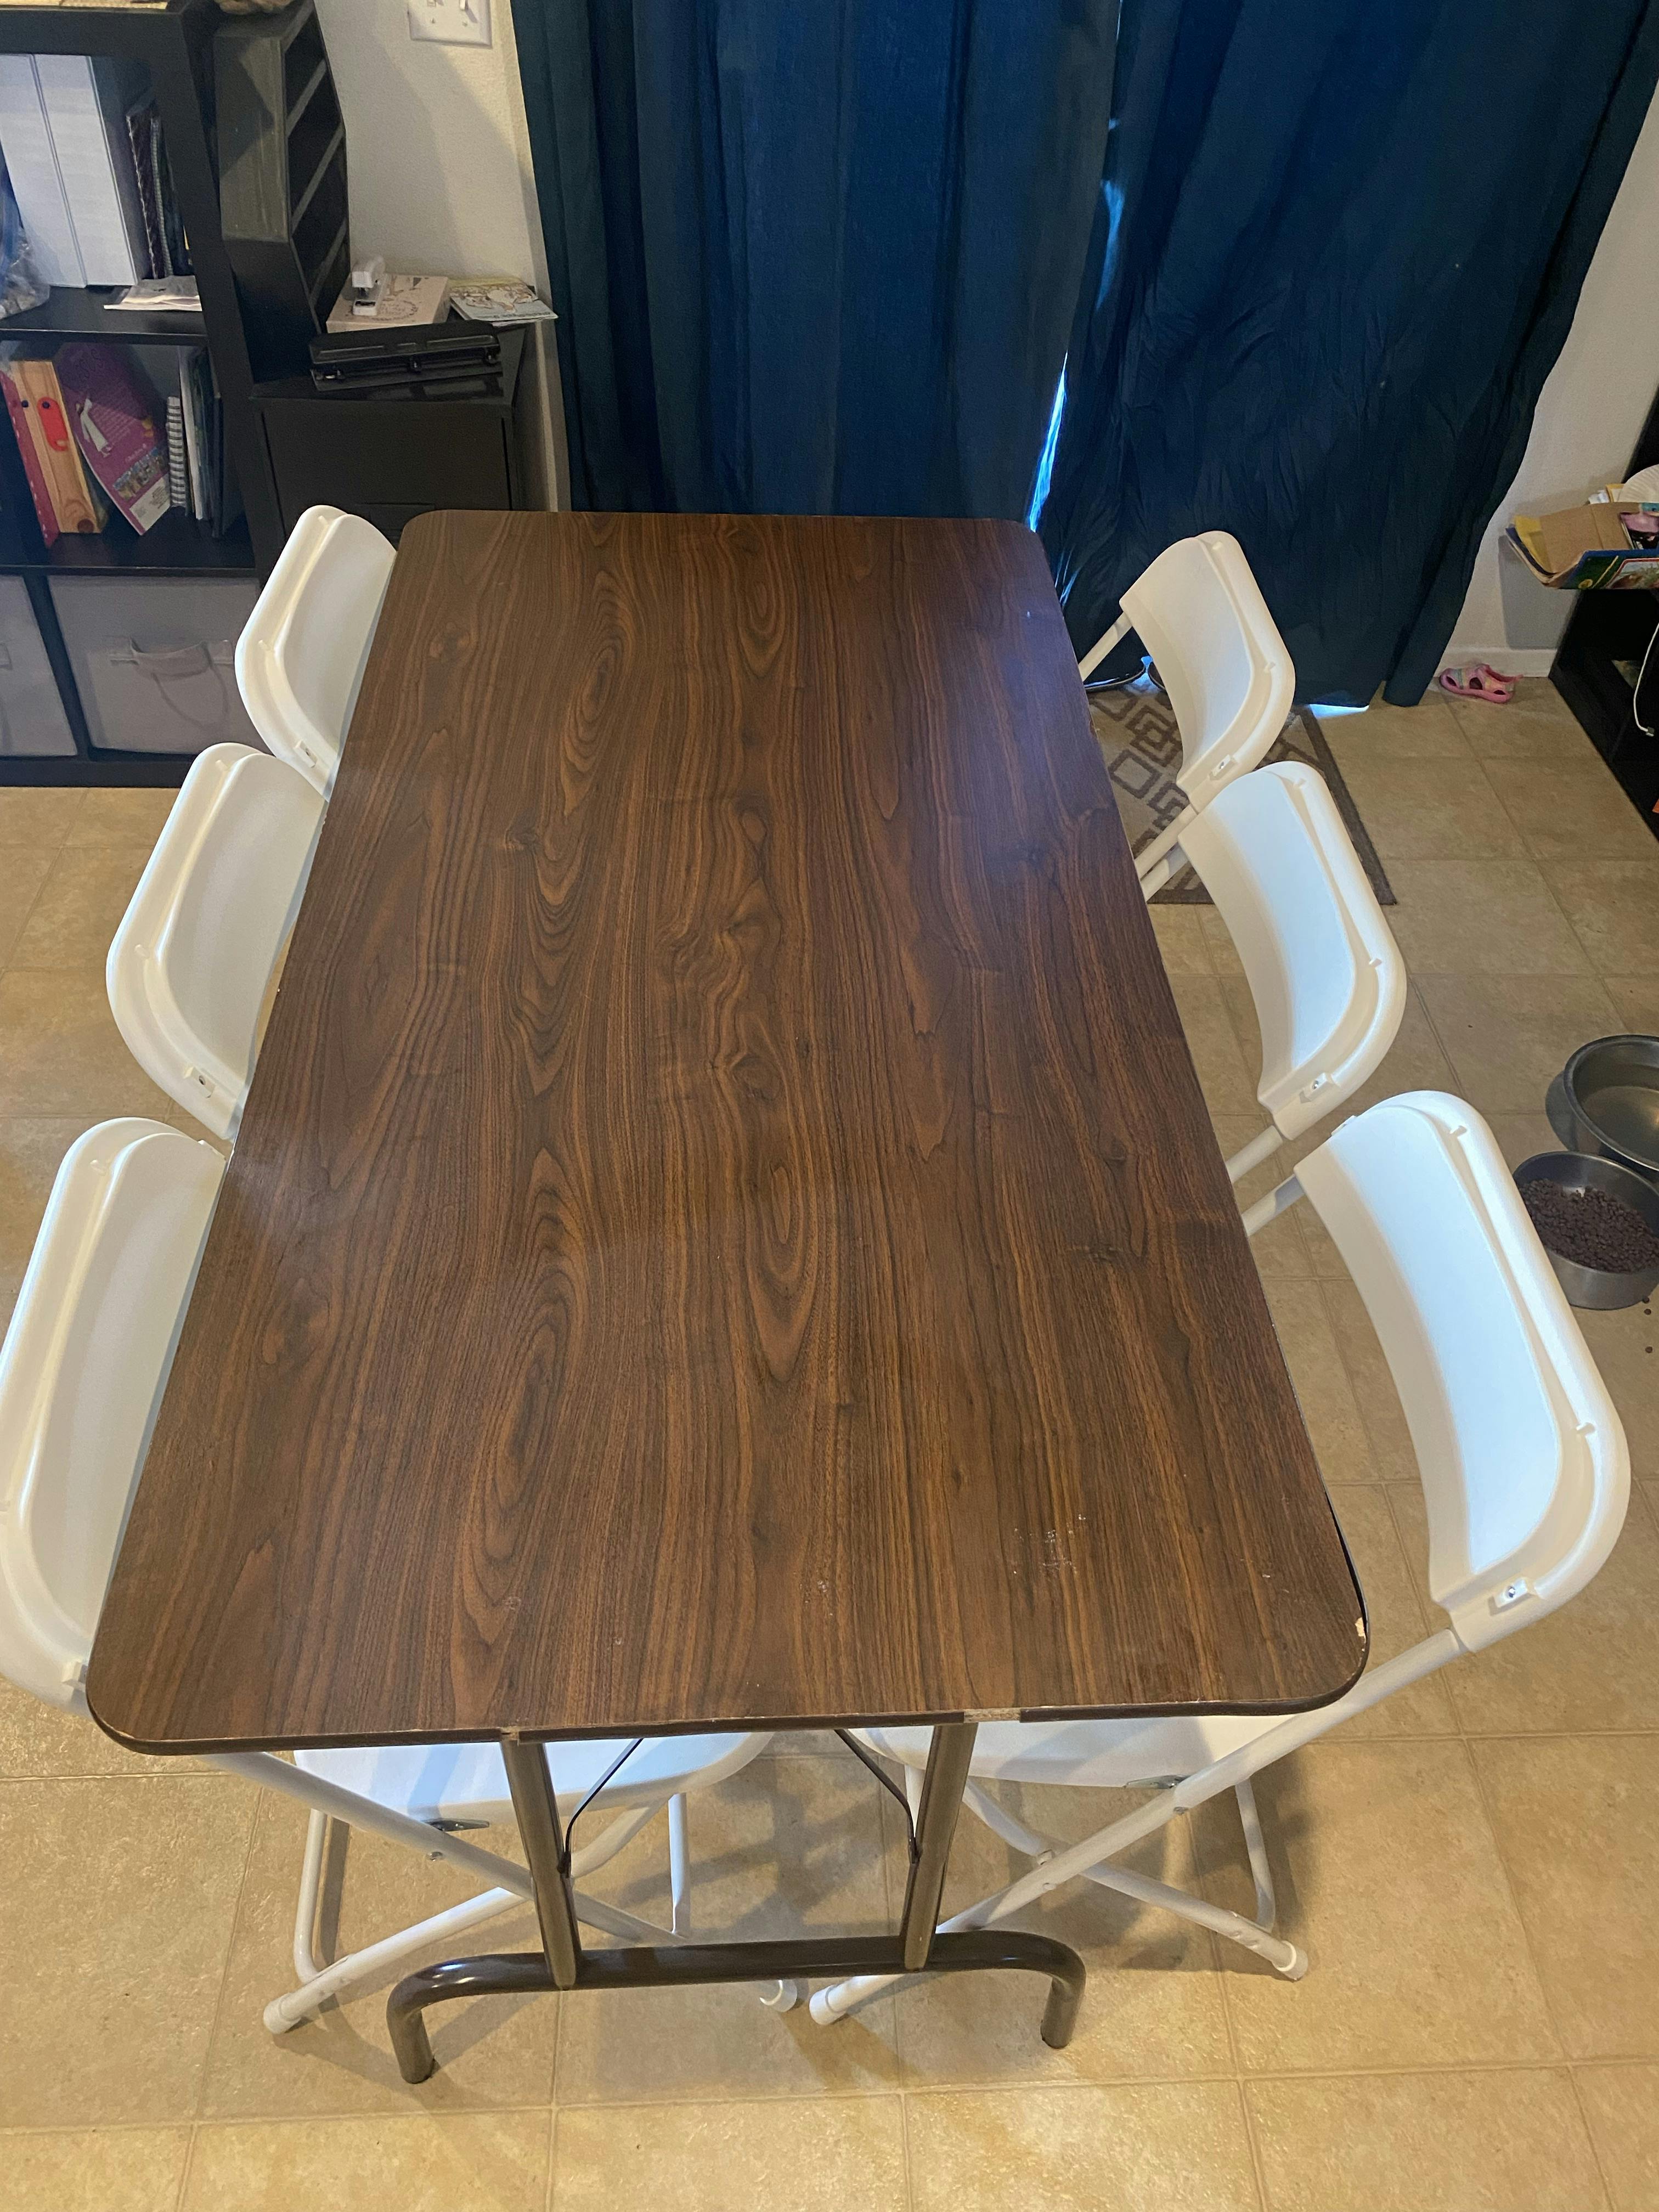 6ft banquet table